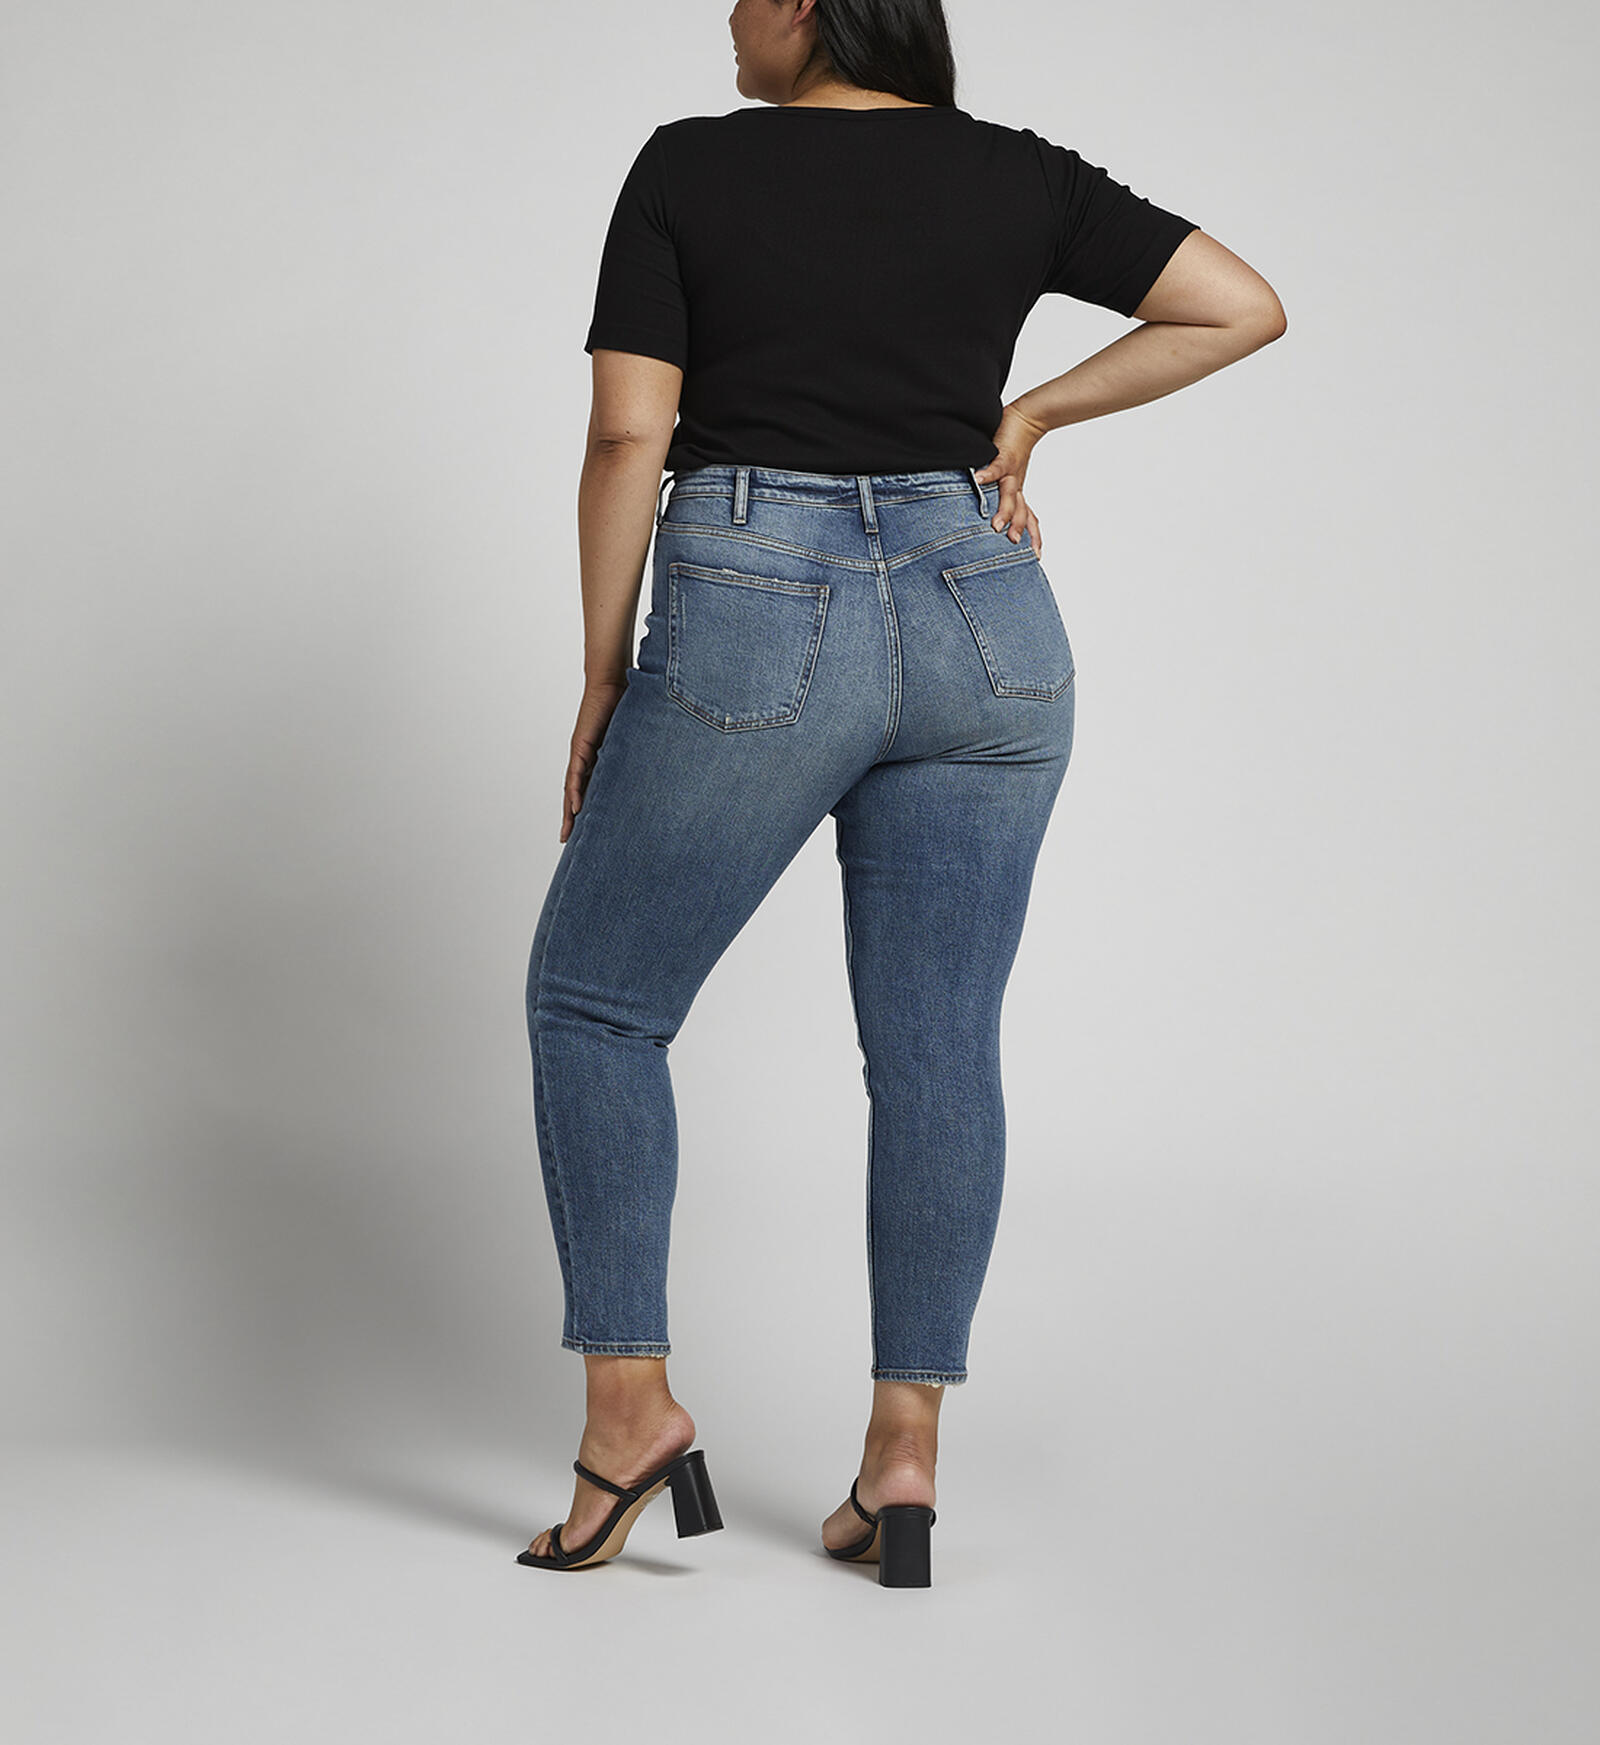 Buy High Rise Tapered Leg Mom Jean Plus Size for CAD 52.00